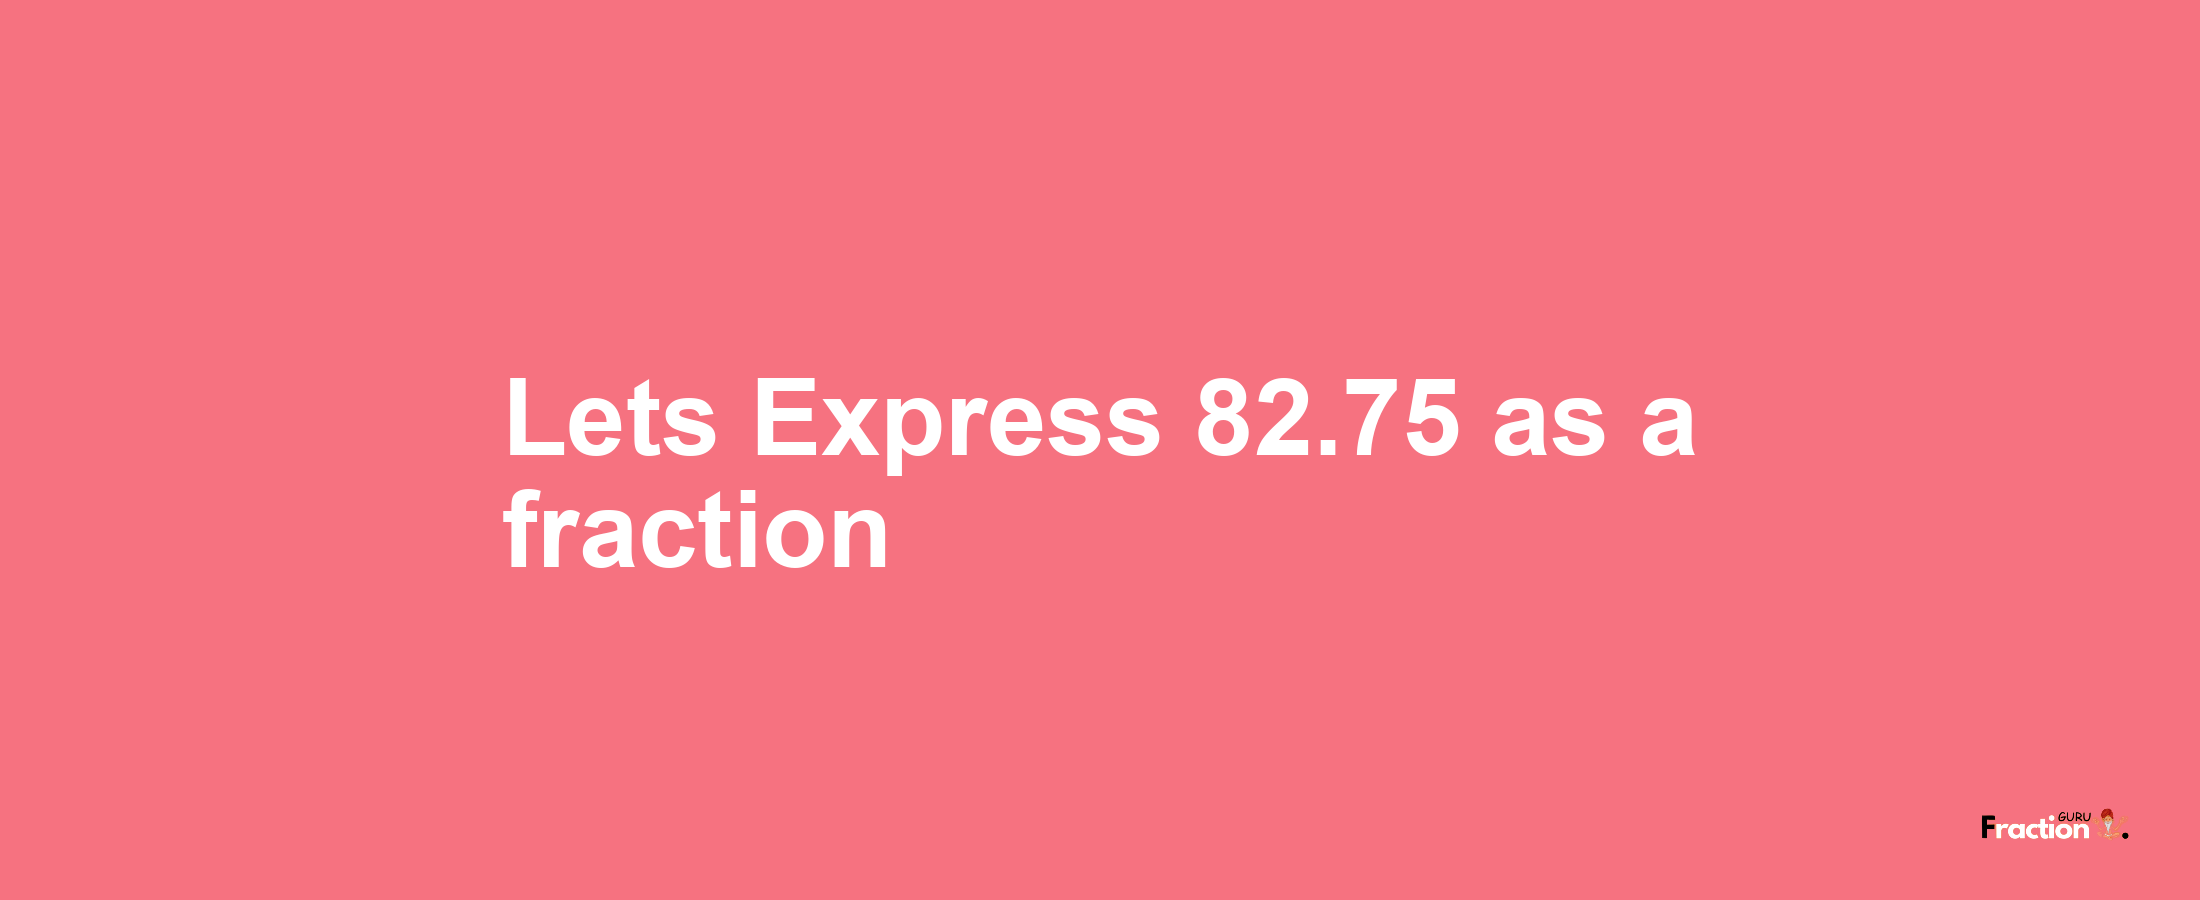 Lets Express 82.75 as afraction